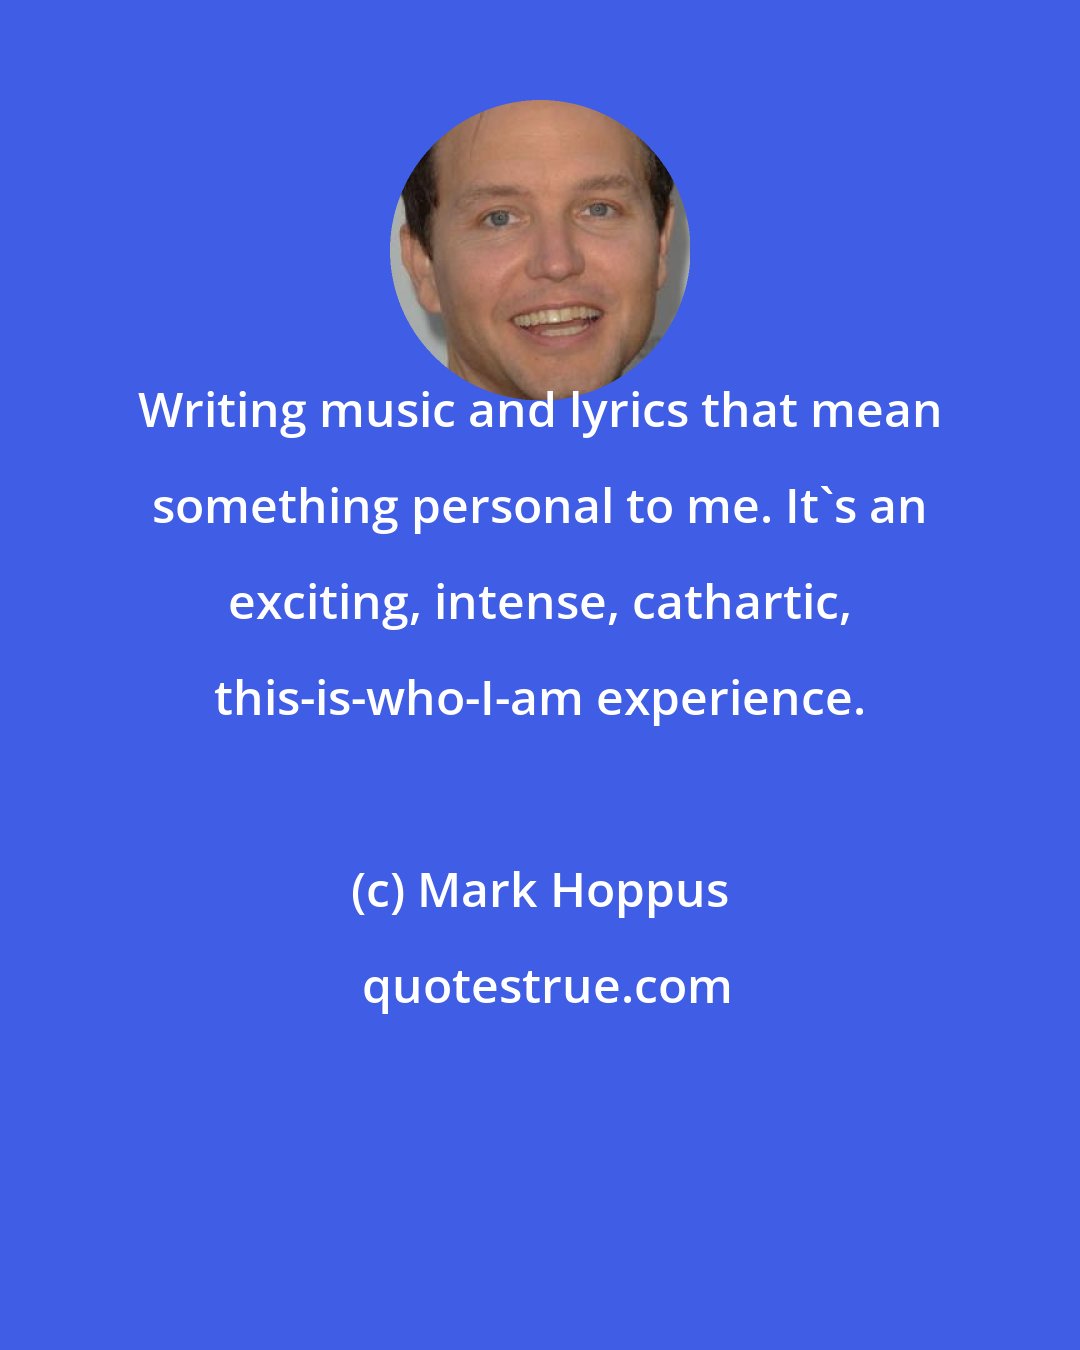 Mark Hoppus: Writing music and lyrics that mean something personal to me. It's an exciting, intense, cathartic, this-is-who-I-am experience.